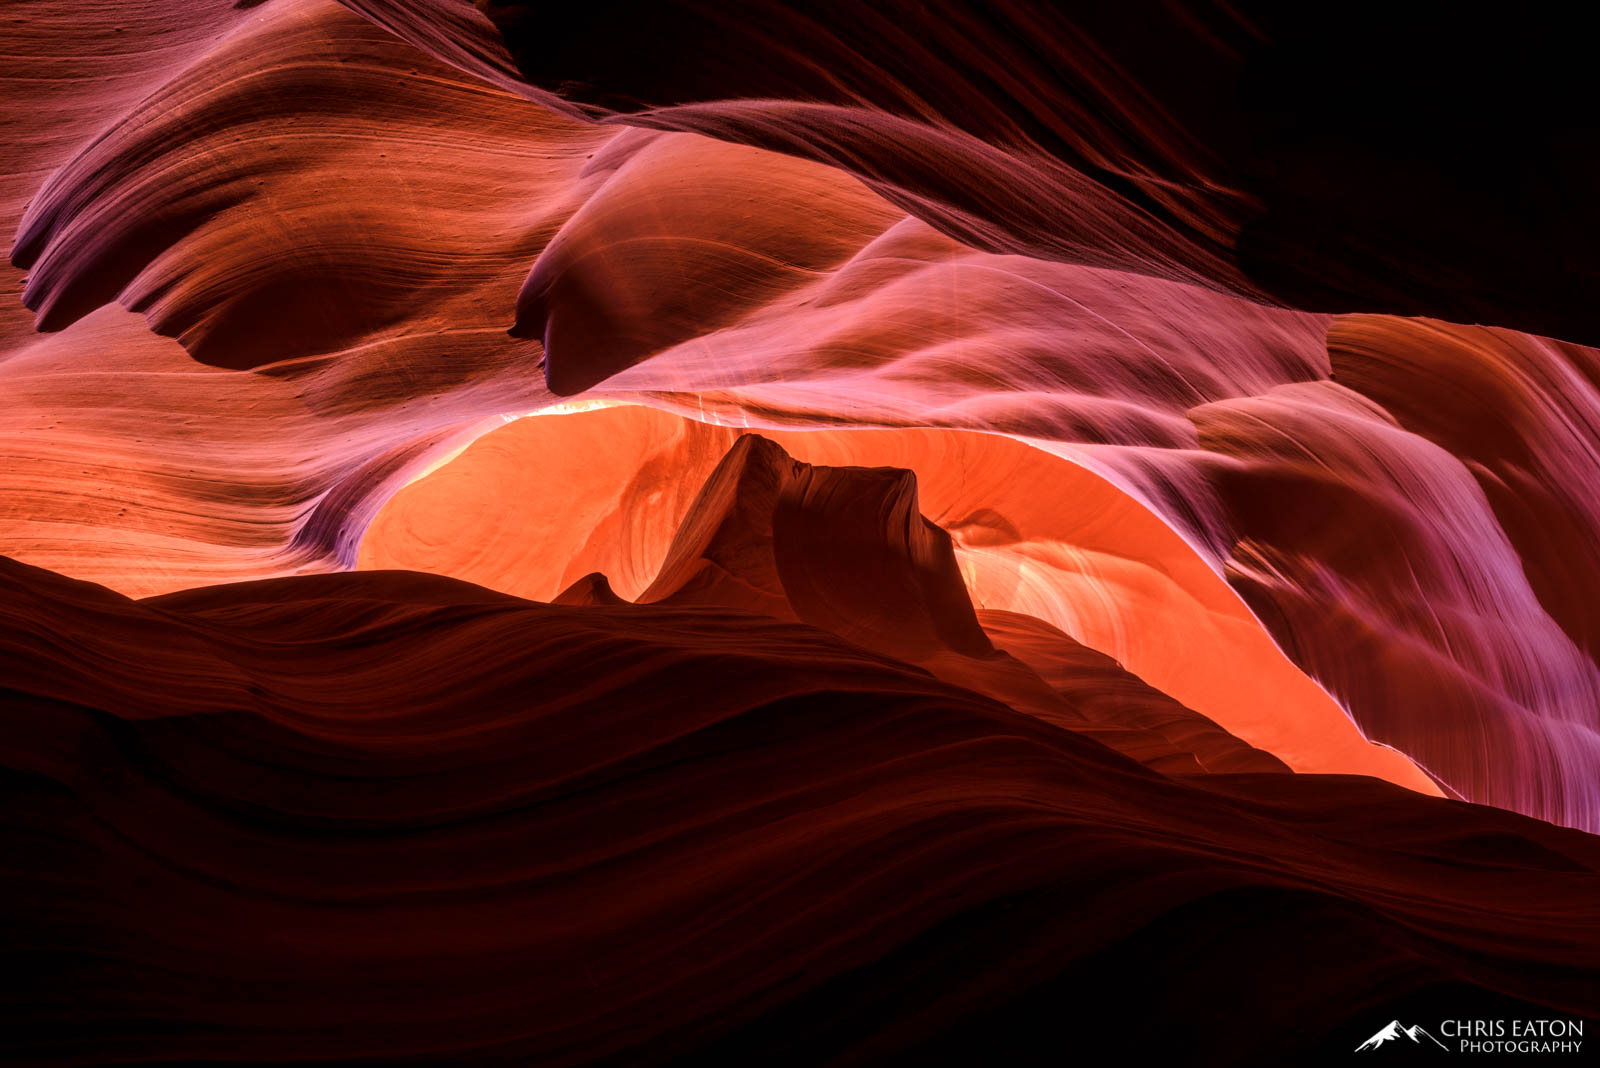 High overhead in Upper Antelope Canyon is a formation that, when the reflected light is just right, looks like The Mitten formation...